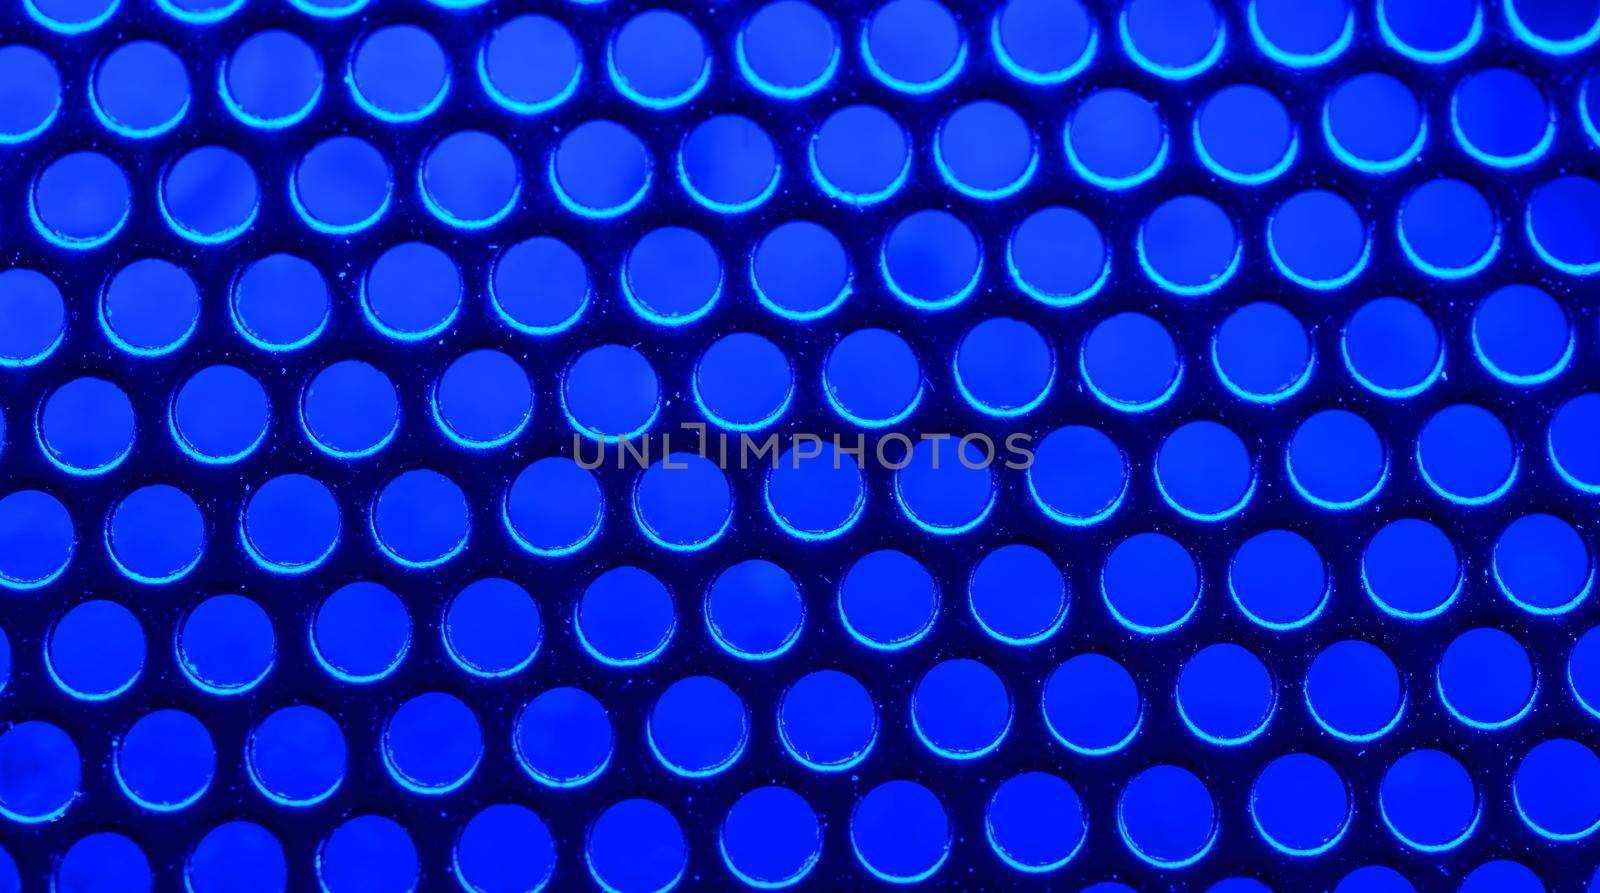 Metallic mesh under the neon blue light - macro photo. Background picture. High quality photo